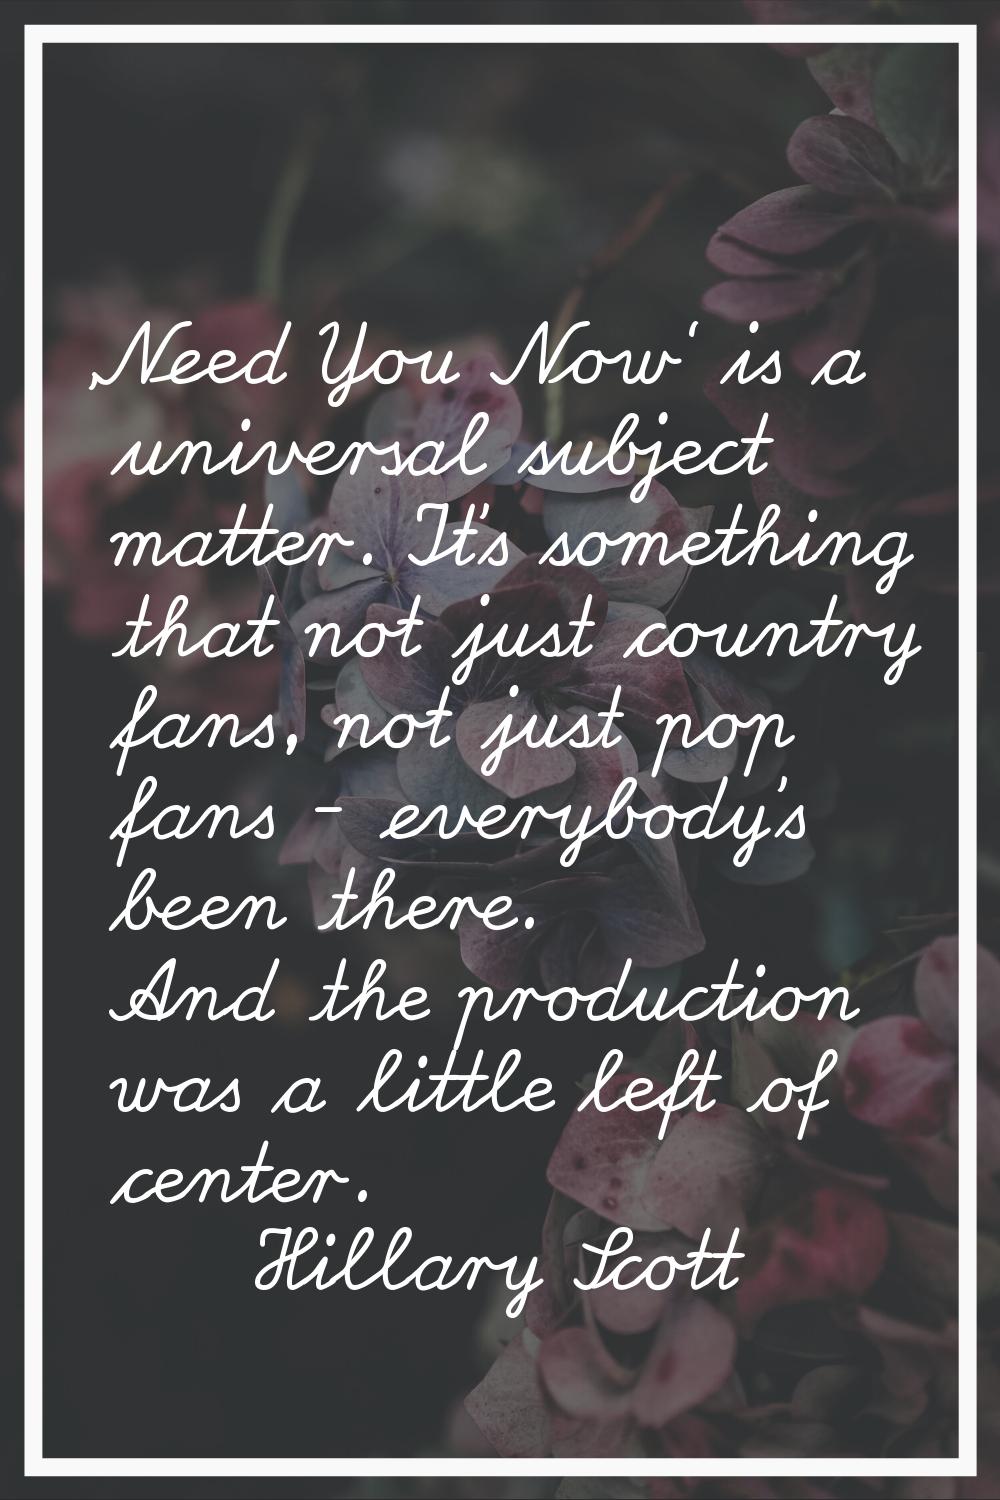 'Need You Now' is a universal subject matter. It's something that not just country fans, not just p